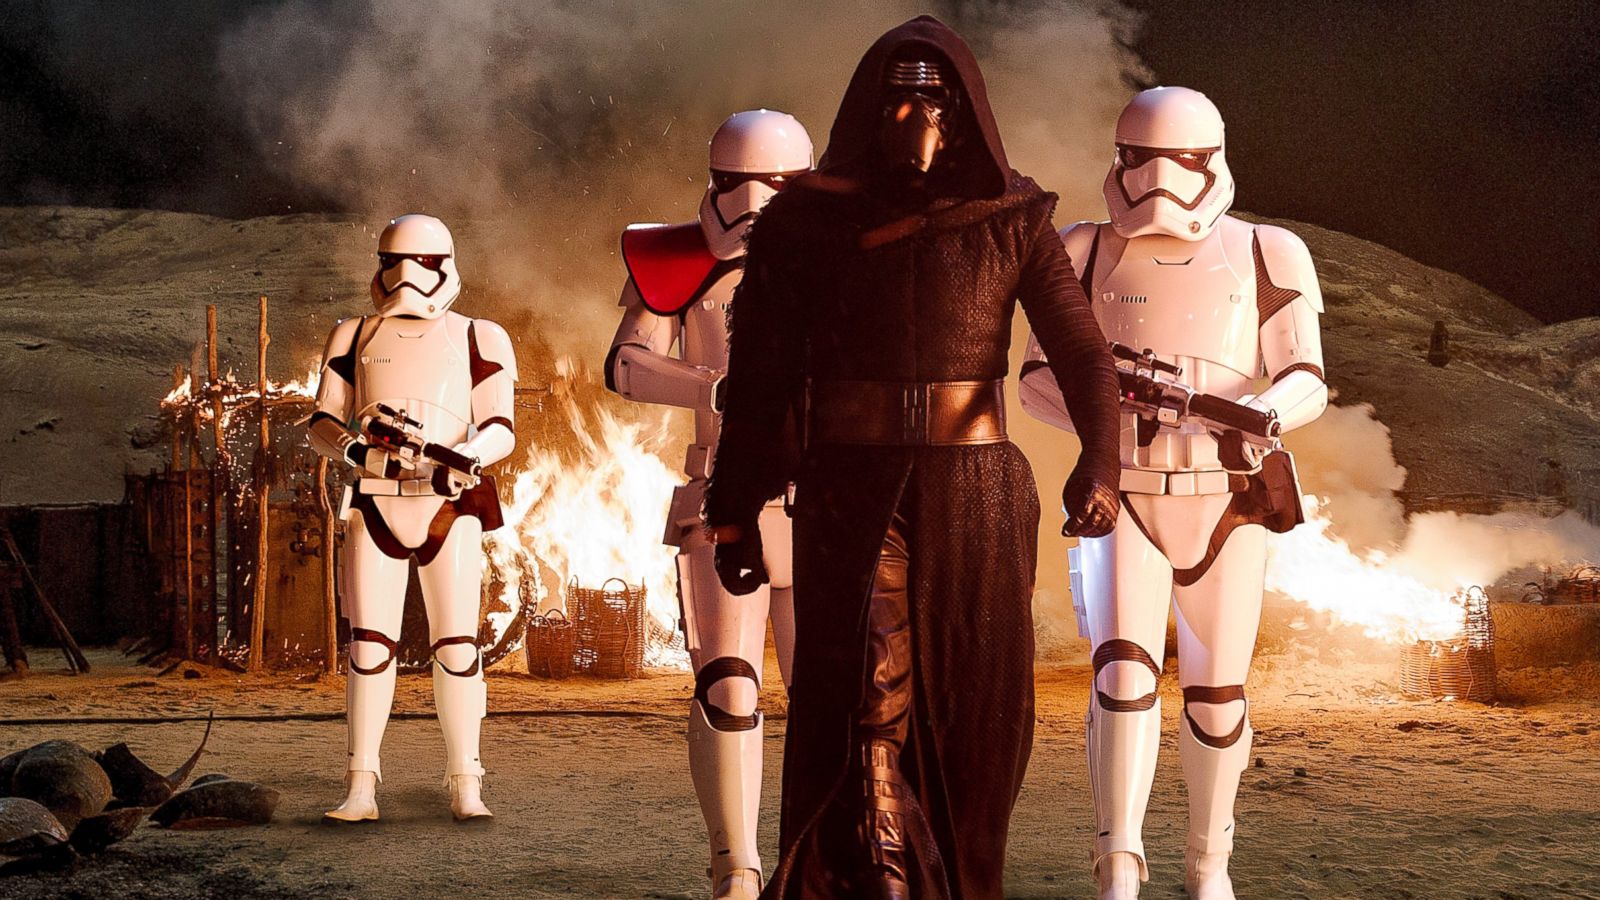 Star Wars: The Force Awakens': Did Kylo Ren Plan to Kill Han Solo